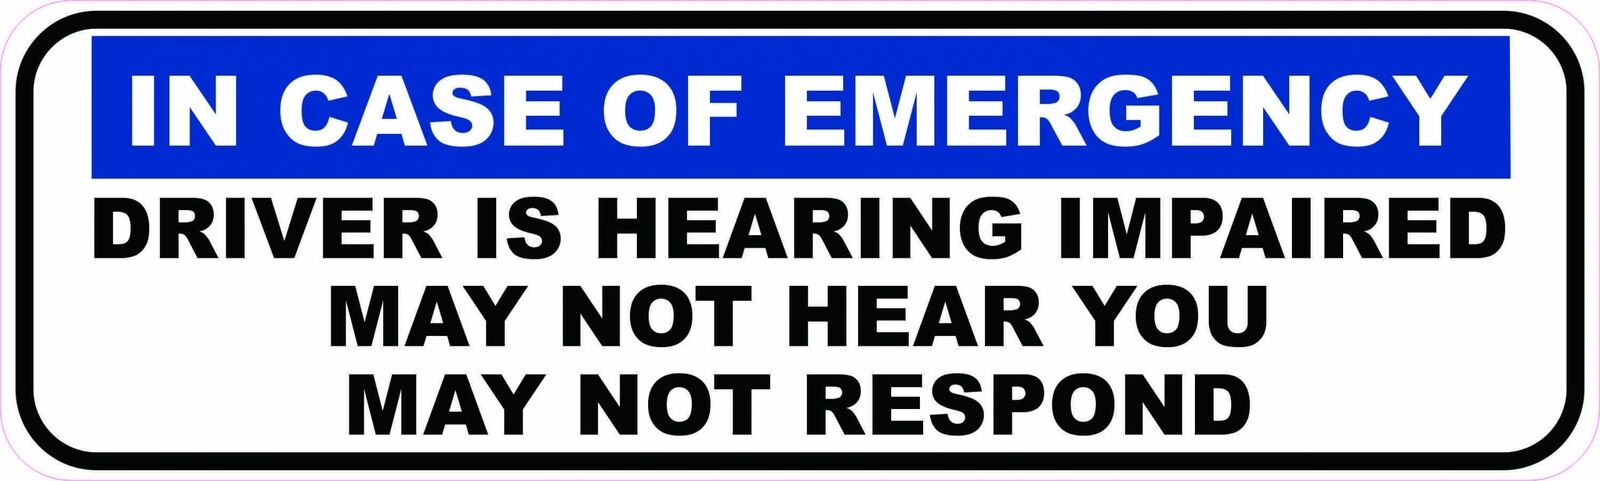 10in x 3in Driver Is Hearing Impaired Magnet Car Truck Vehicle Magnetic Sign